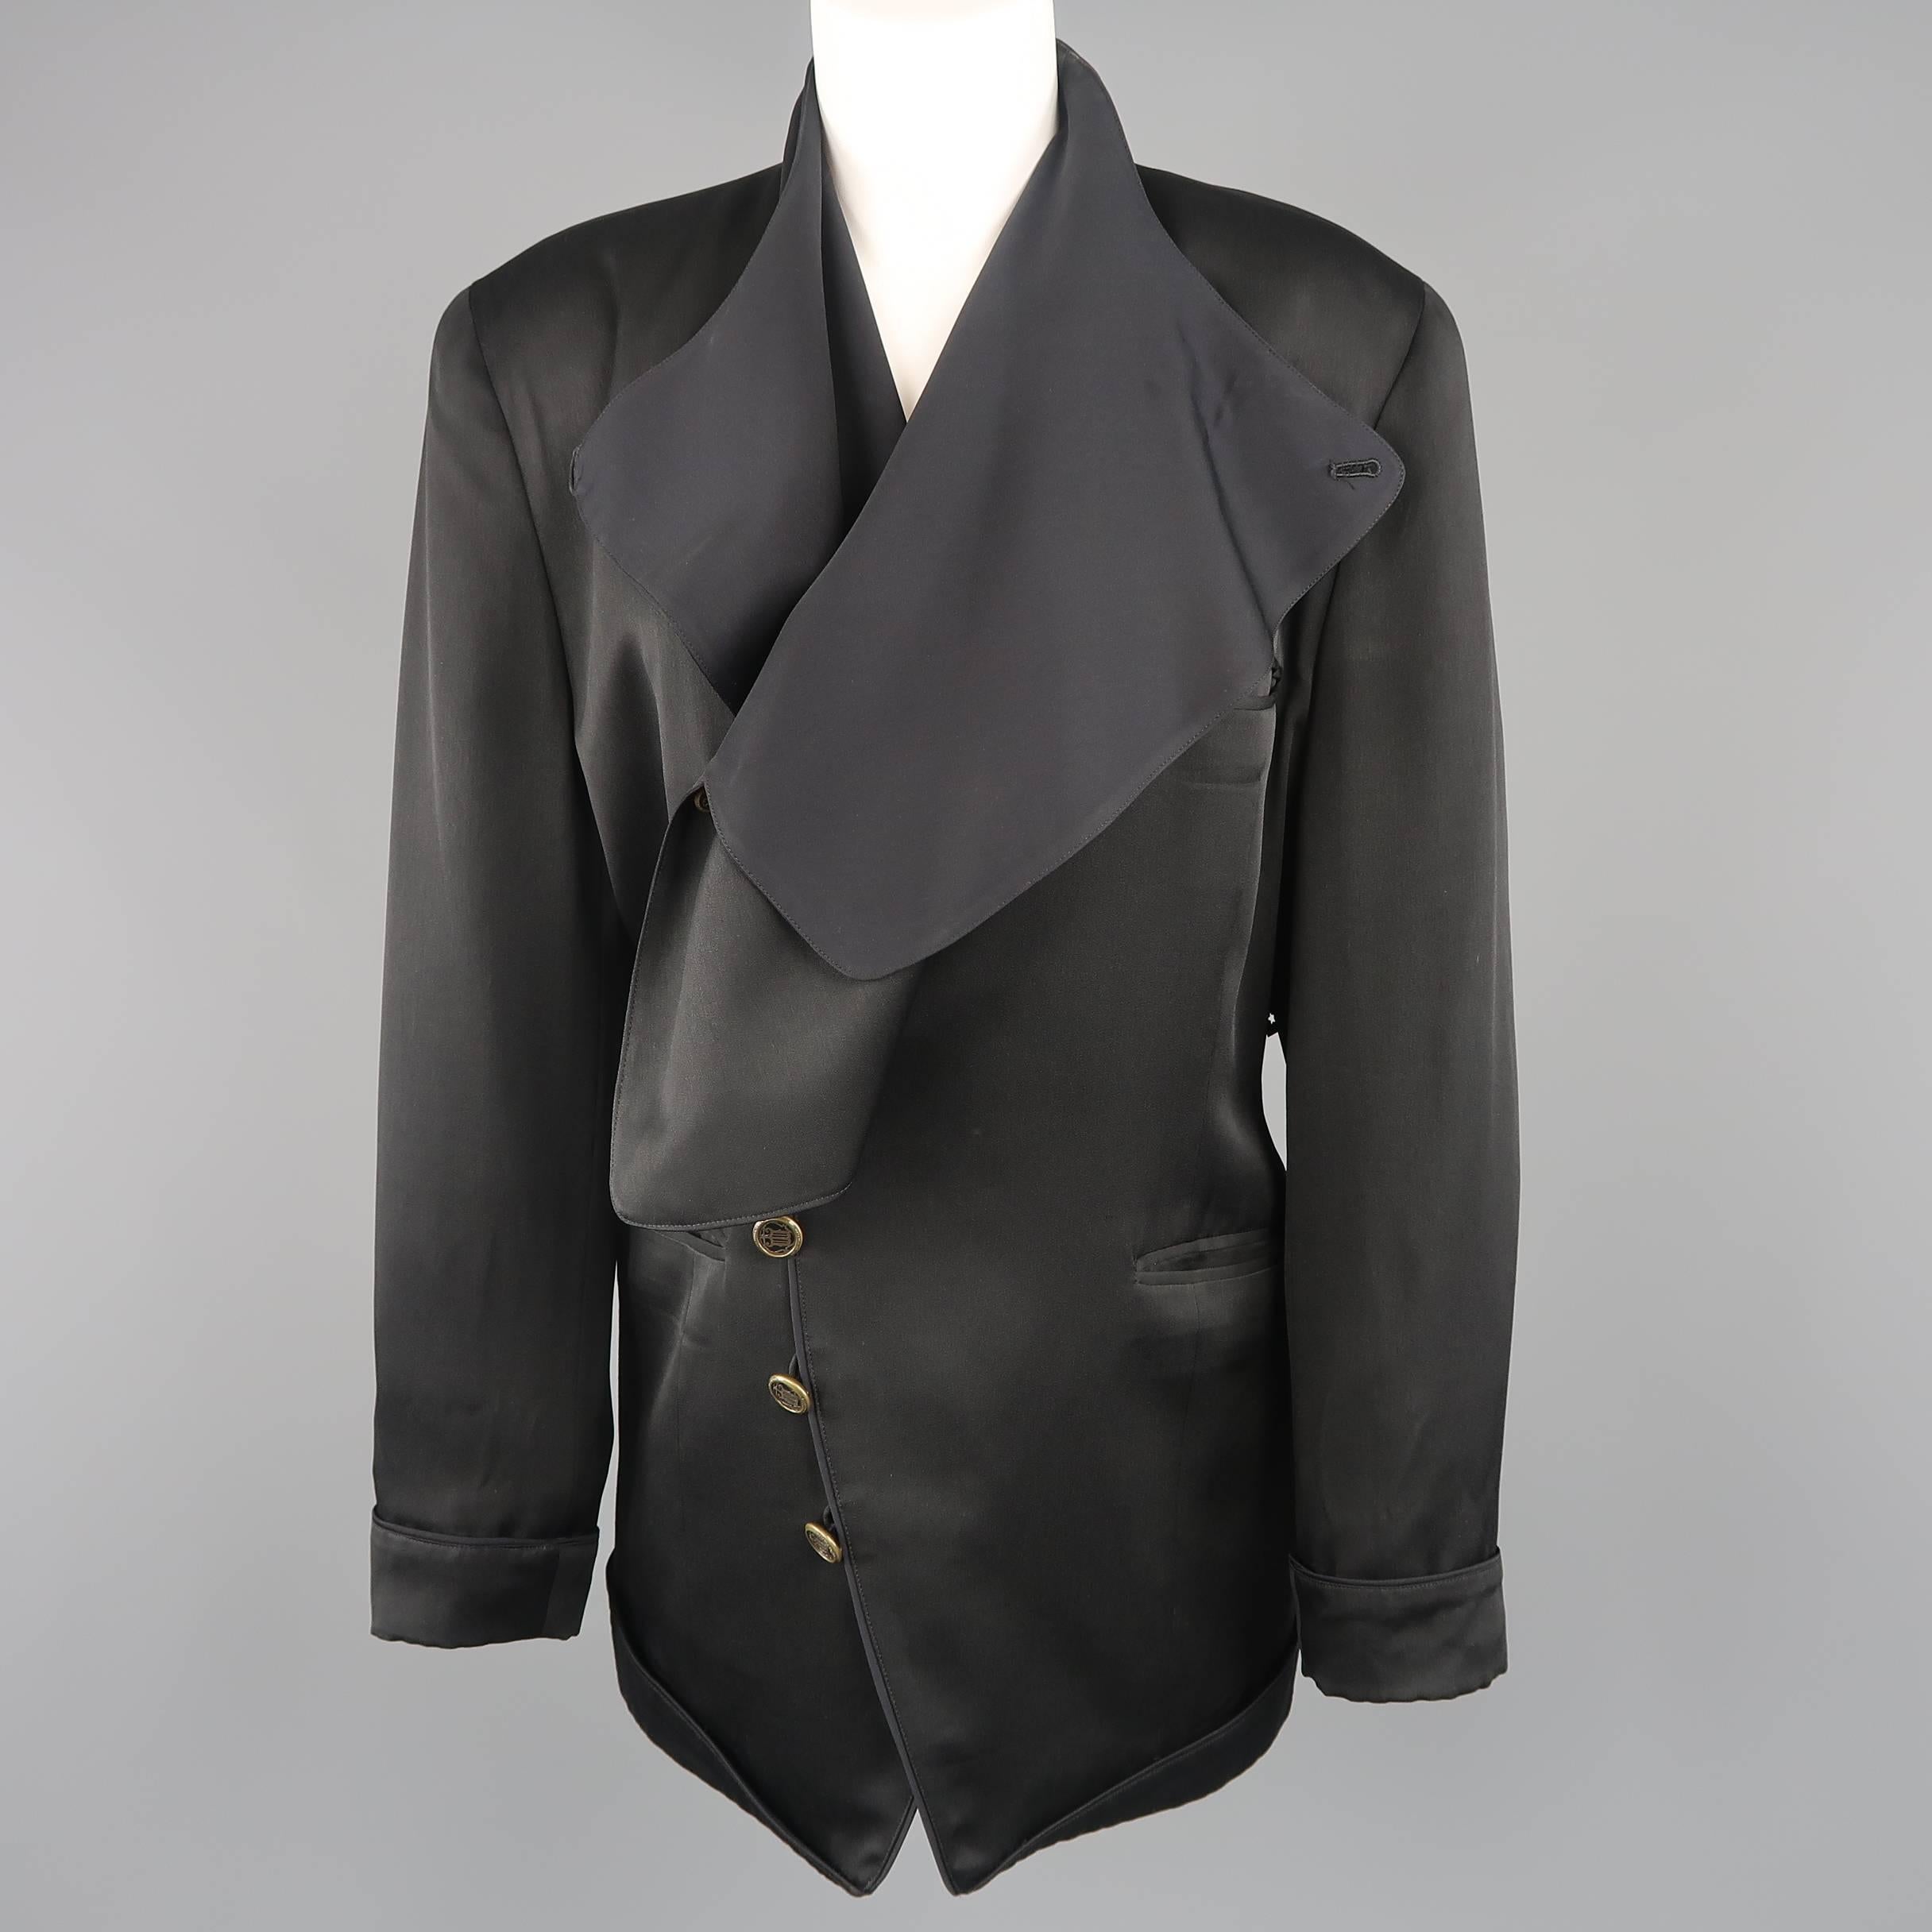 Vintage MATSUDA jacket comes in black semi matte satin material with a double breasted closure, gold tone buttons, draped satin lined lapel, and cuffed hem. Care tag faded. As-is. Otherwise excellent condition. Made in Japan.
 
Good Pre-Owned